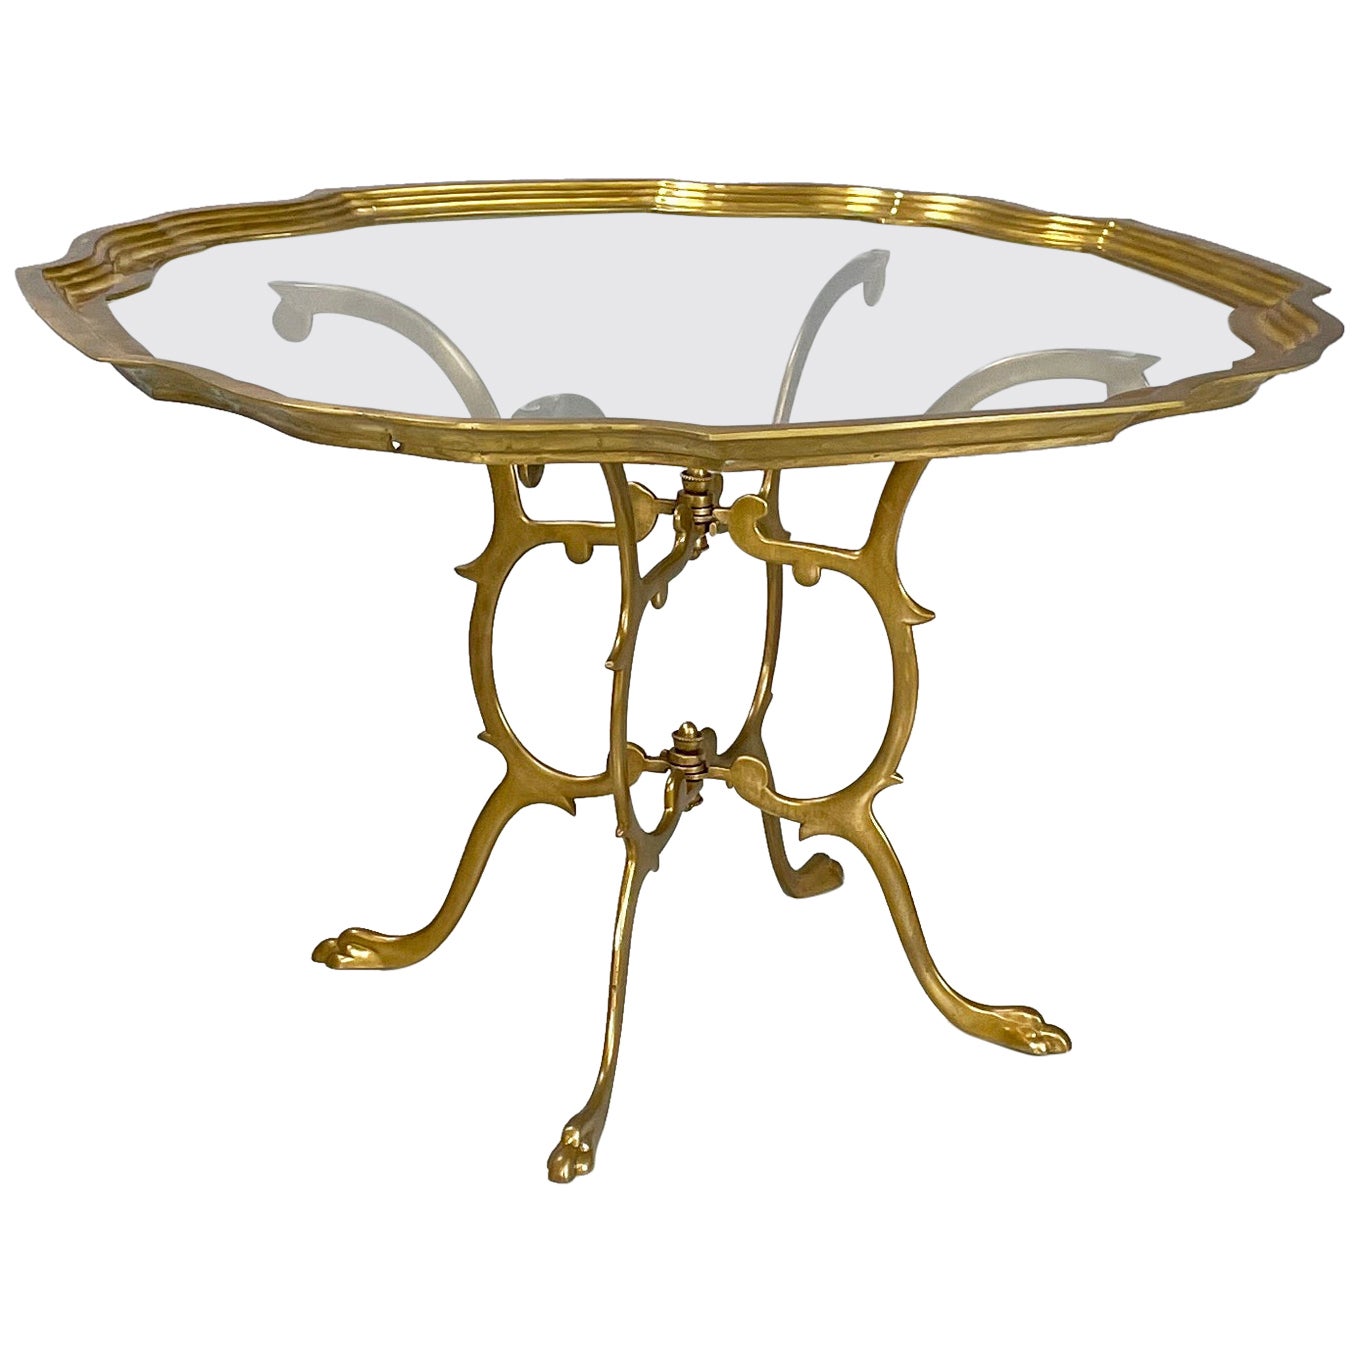 Italian mid-century modern Coffee table in glass and brass, 1960s